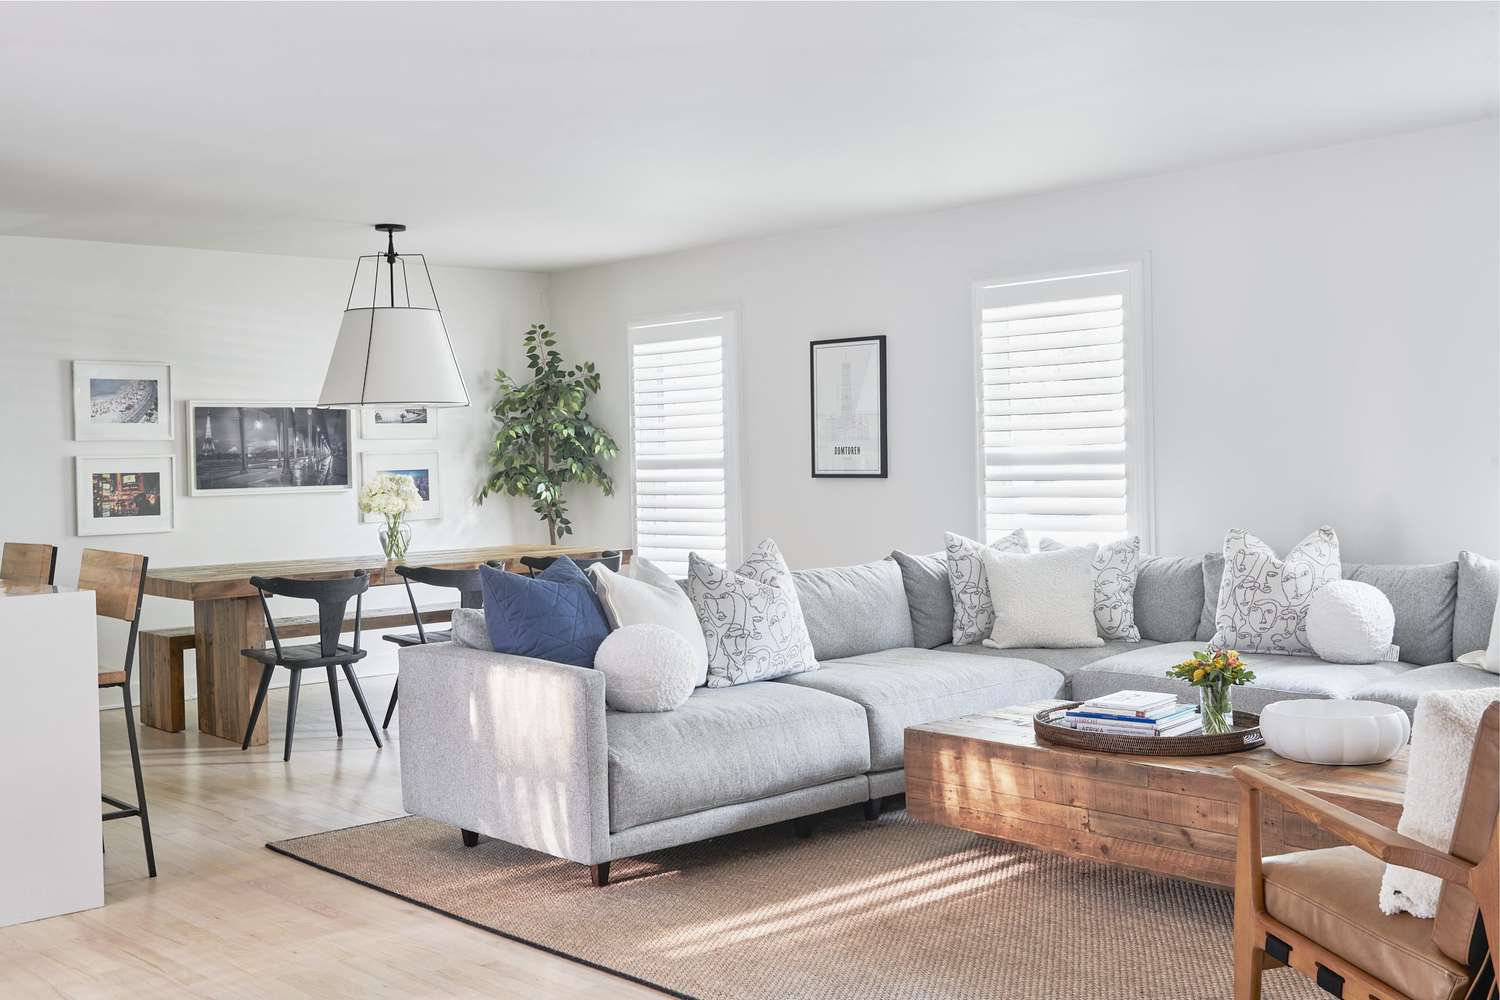 soft grey sectional and wood furniture